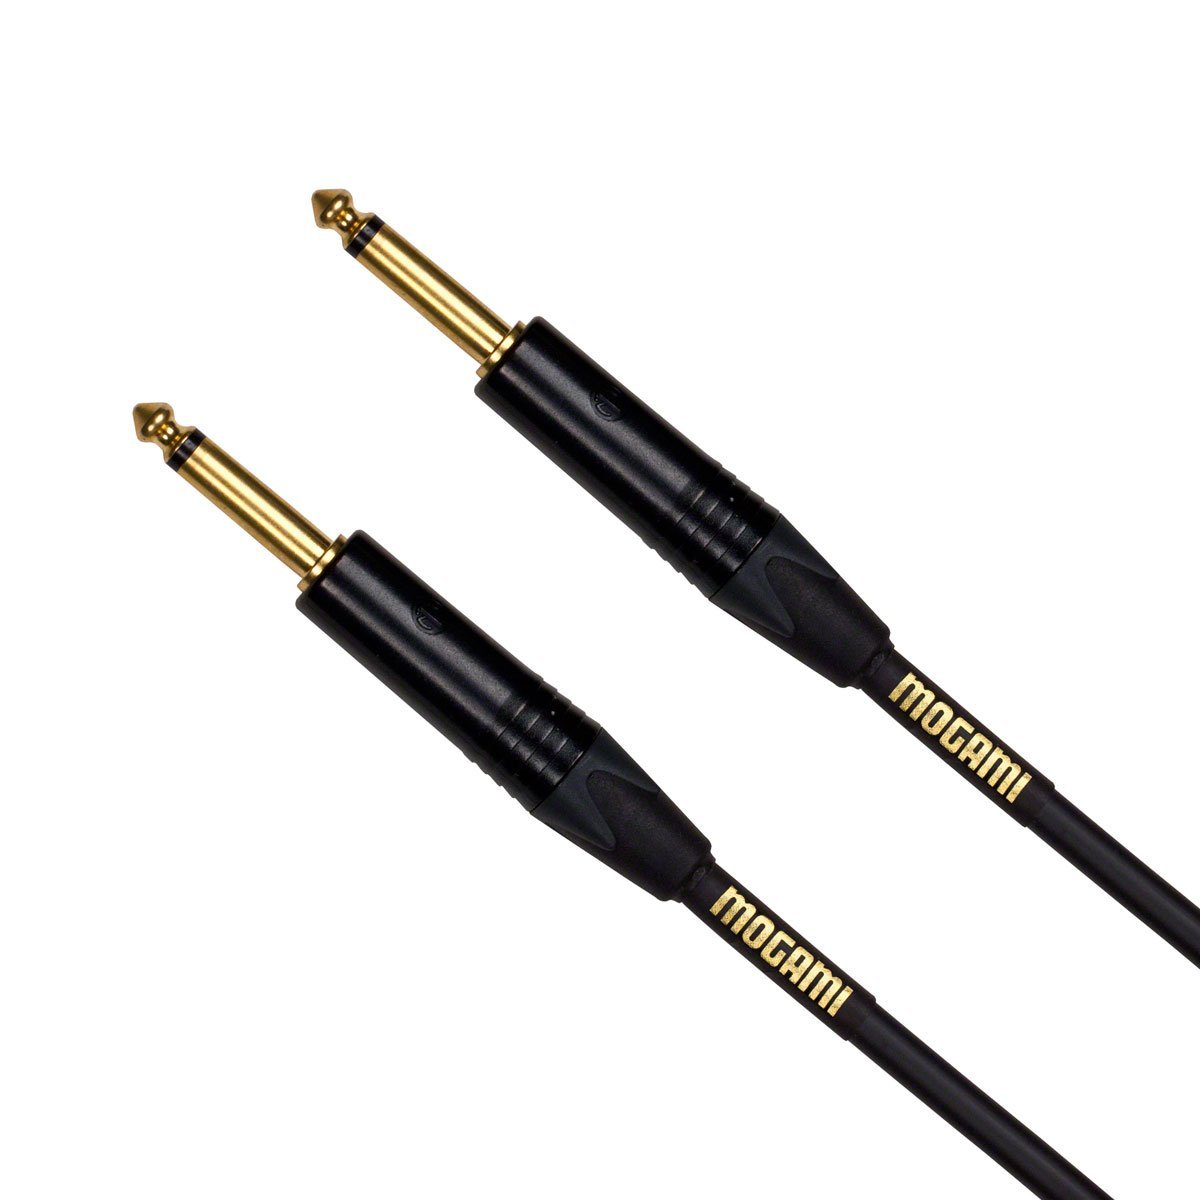 Mogami Gold 18 Foot Instrument Cable